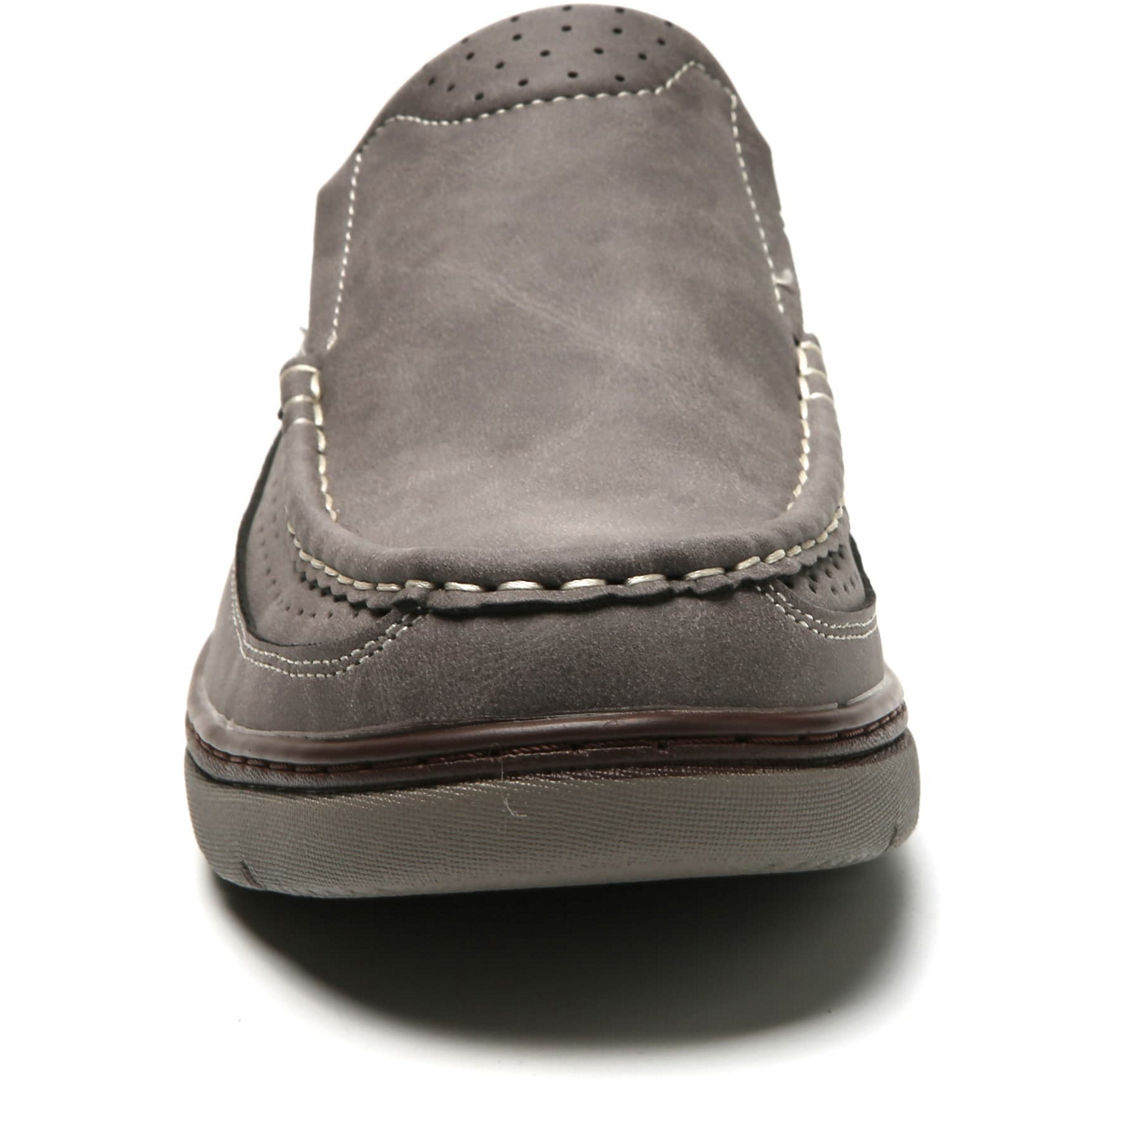 ASTON MARC MEN'S SLIP ON COMFORT CASUAL SHOES - Image 3 of 5